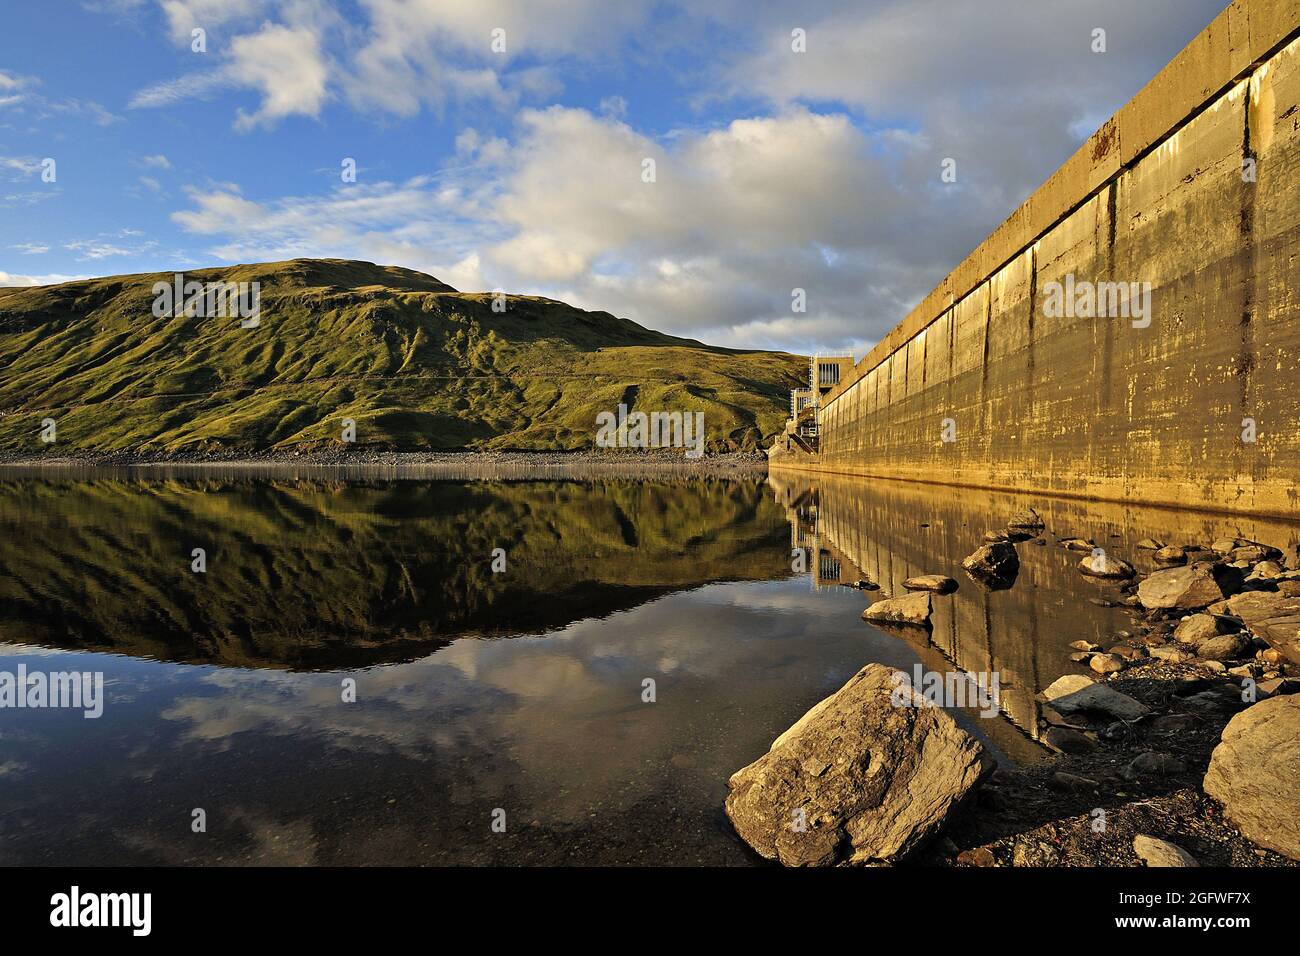 Hydro-electric dam and reservoir in Glen Lyon with pebbled shore and distant ridgeline, United Kingdom, Scotland, Perthshire, Glen Lyon Stock Photo